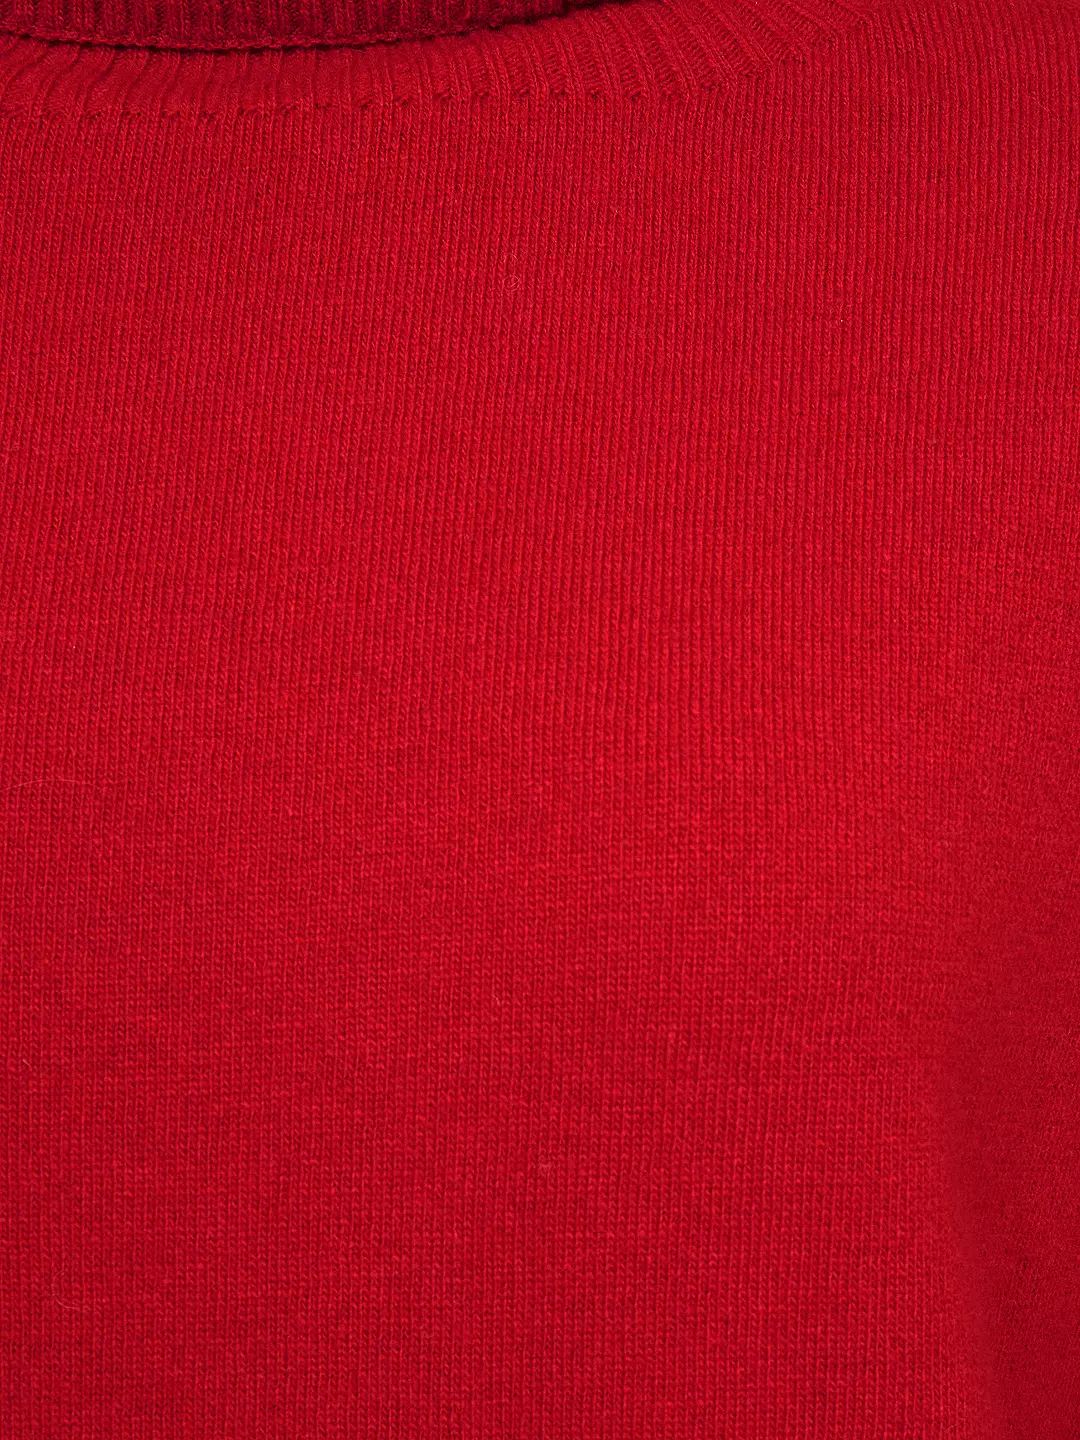 Celtic & Co. Geelong Slouch Roll Neck Jumper, Pillarbox Red | John Lewis (UK)